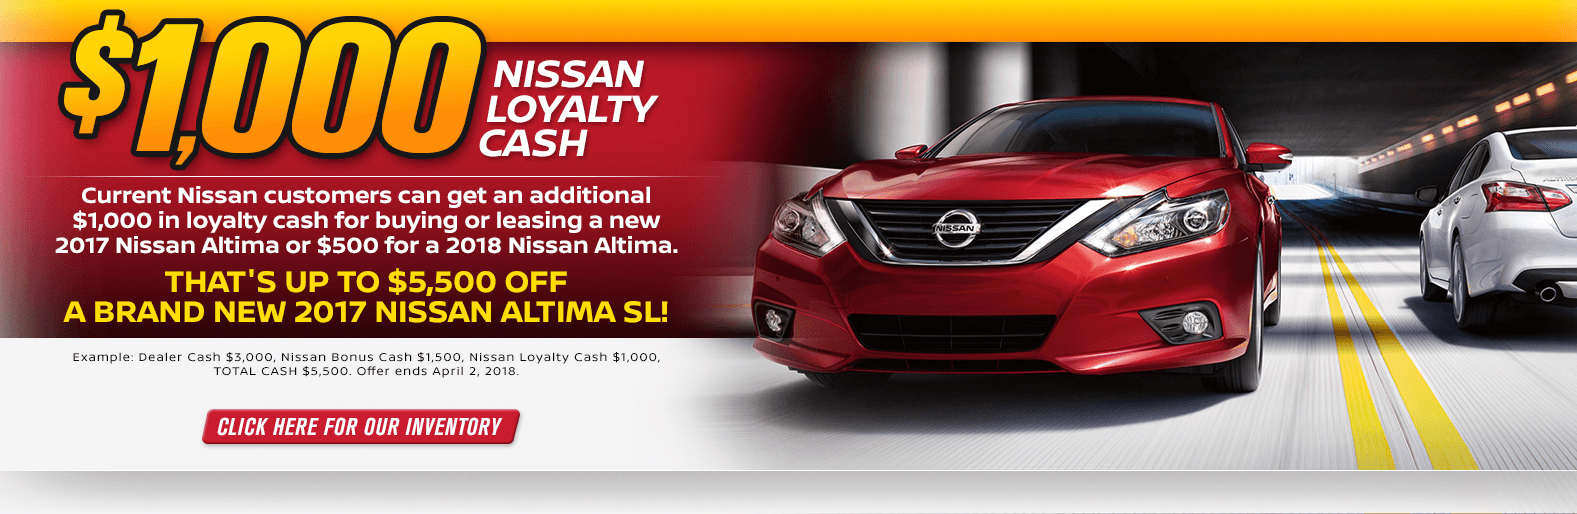 don-t-miss-out-on-the-1-000-nissan-loyalty-cash-at-passport-nissan-md